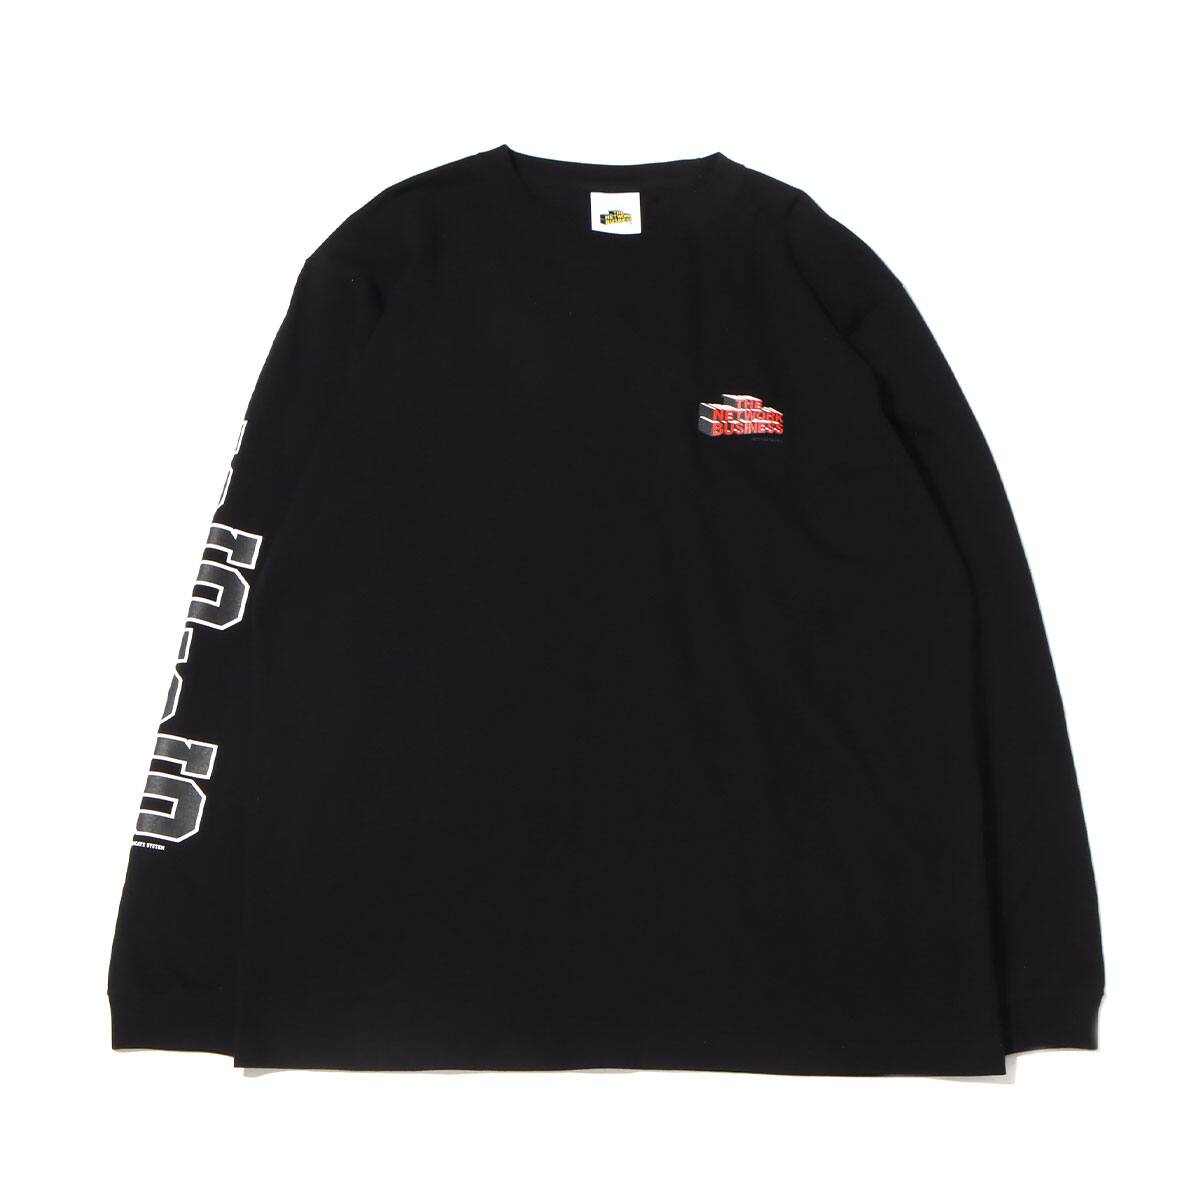 THE NETWORK BUSINESS L/S T-SHIRT BRED BLACK 21HO-I_photo_large